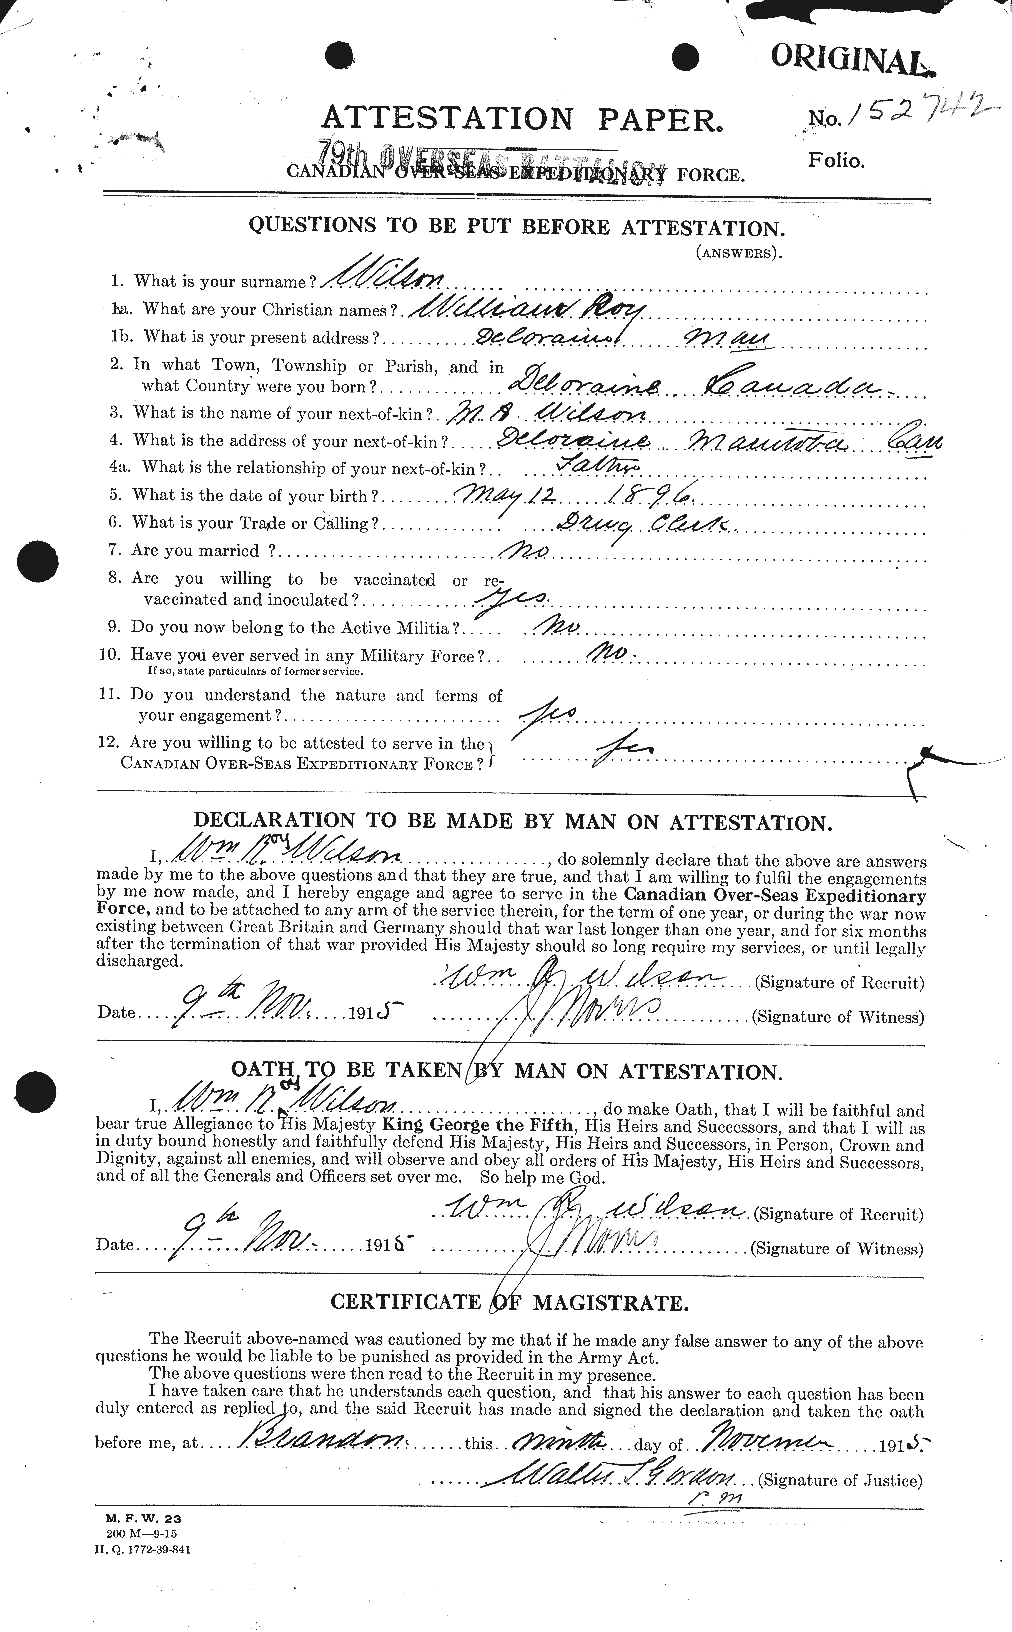 Personnel Records of the First World War - CEF 684104a